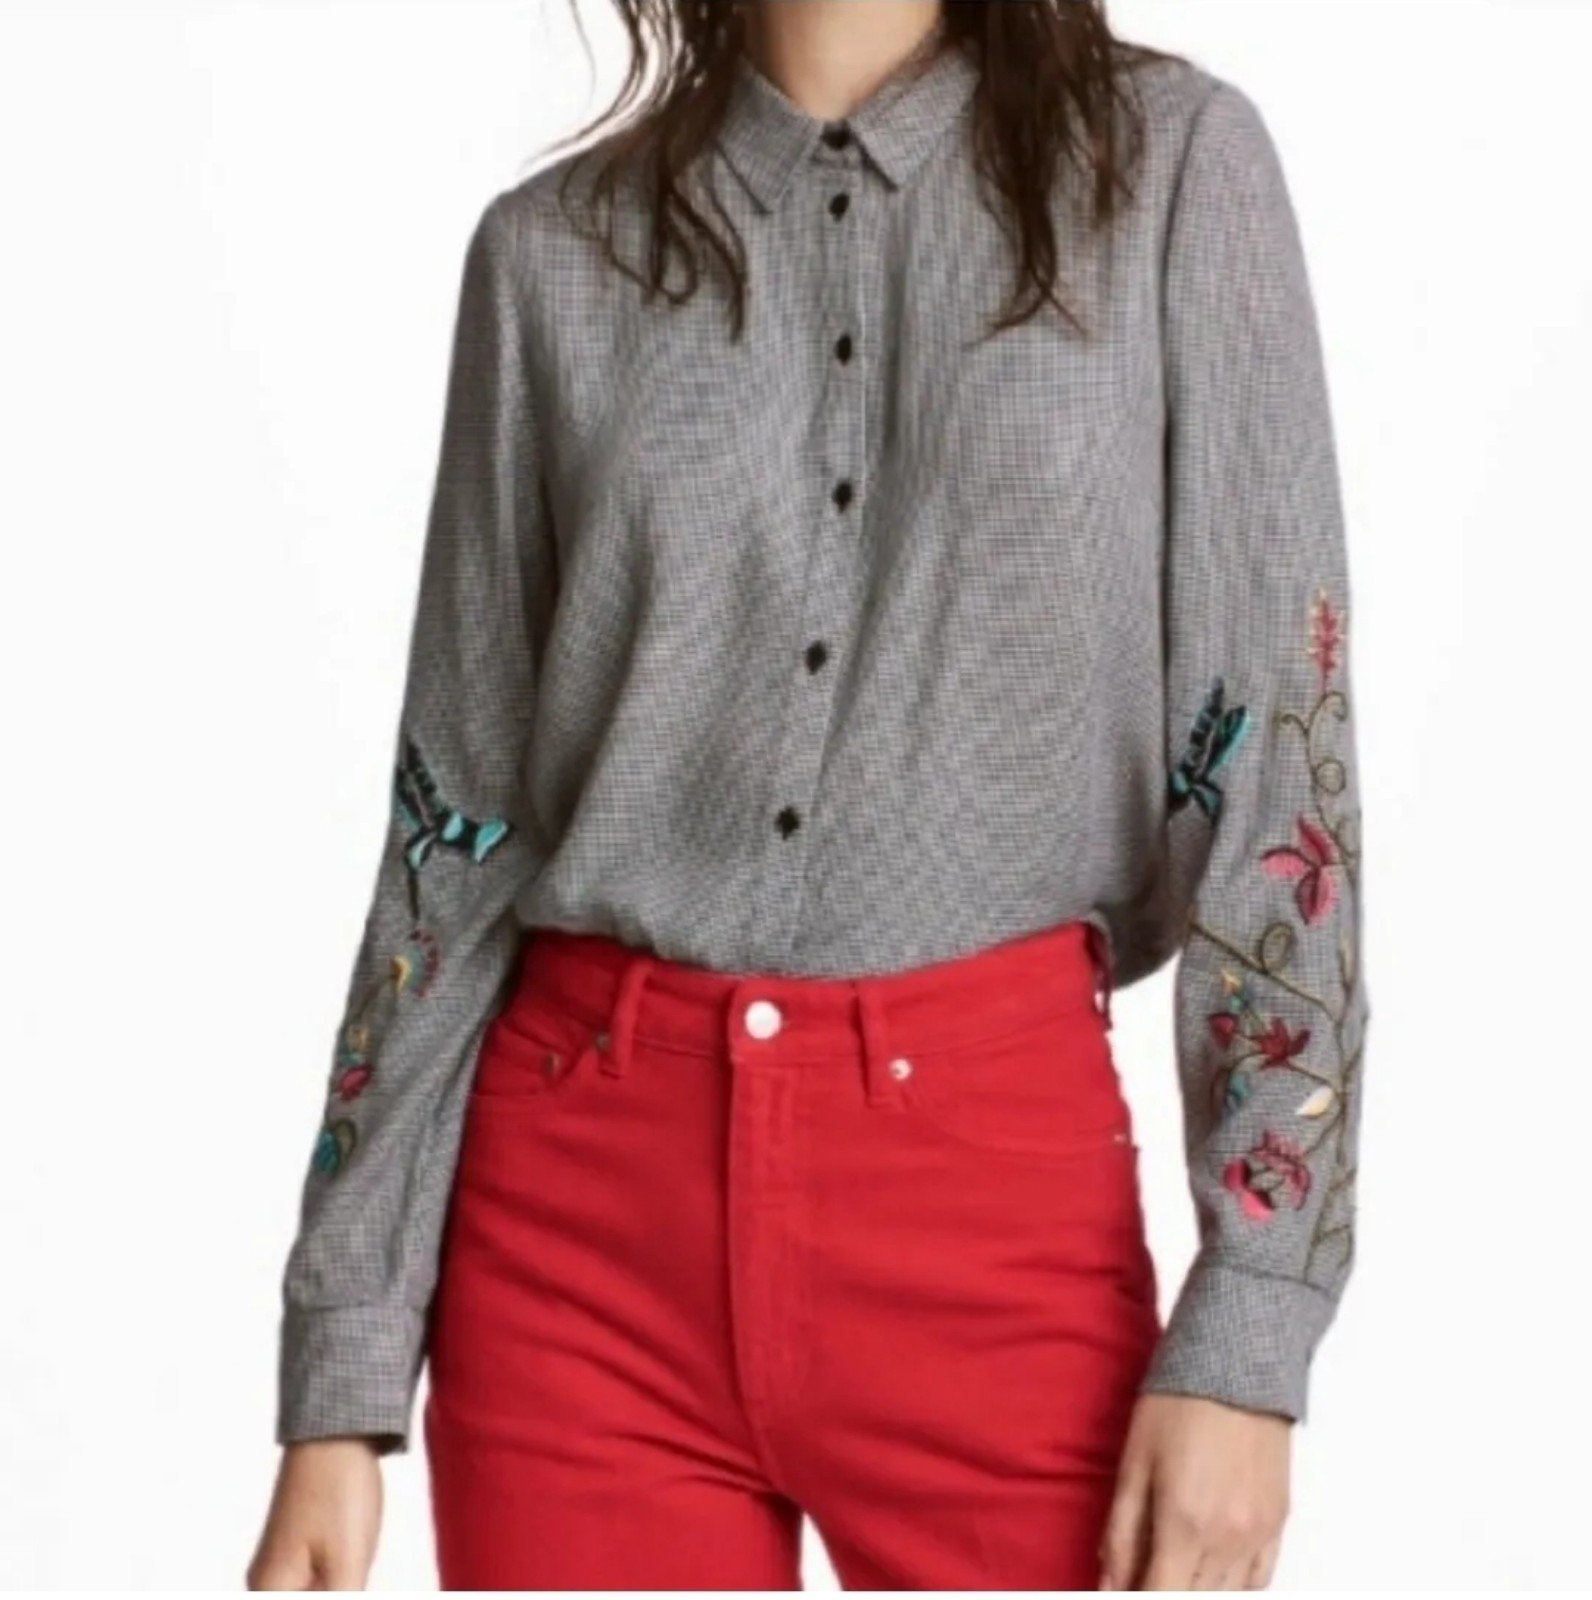 Authentic H&M • Embroidered Buttondown htOp9uW1G Wholes